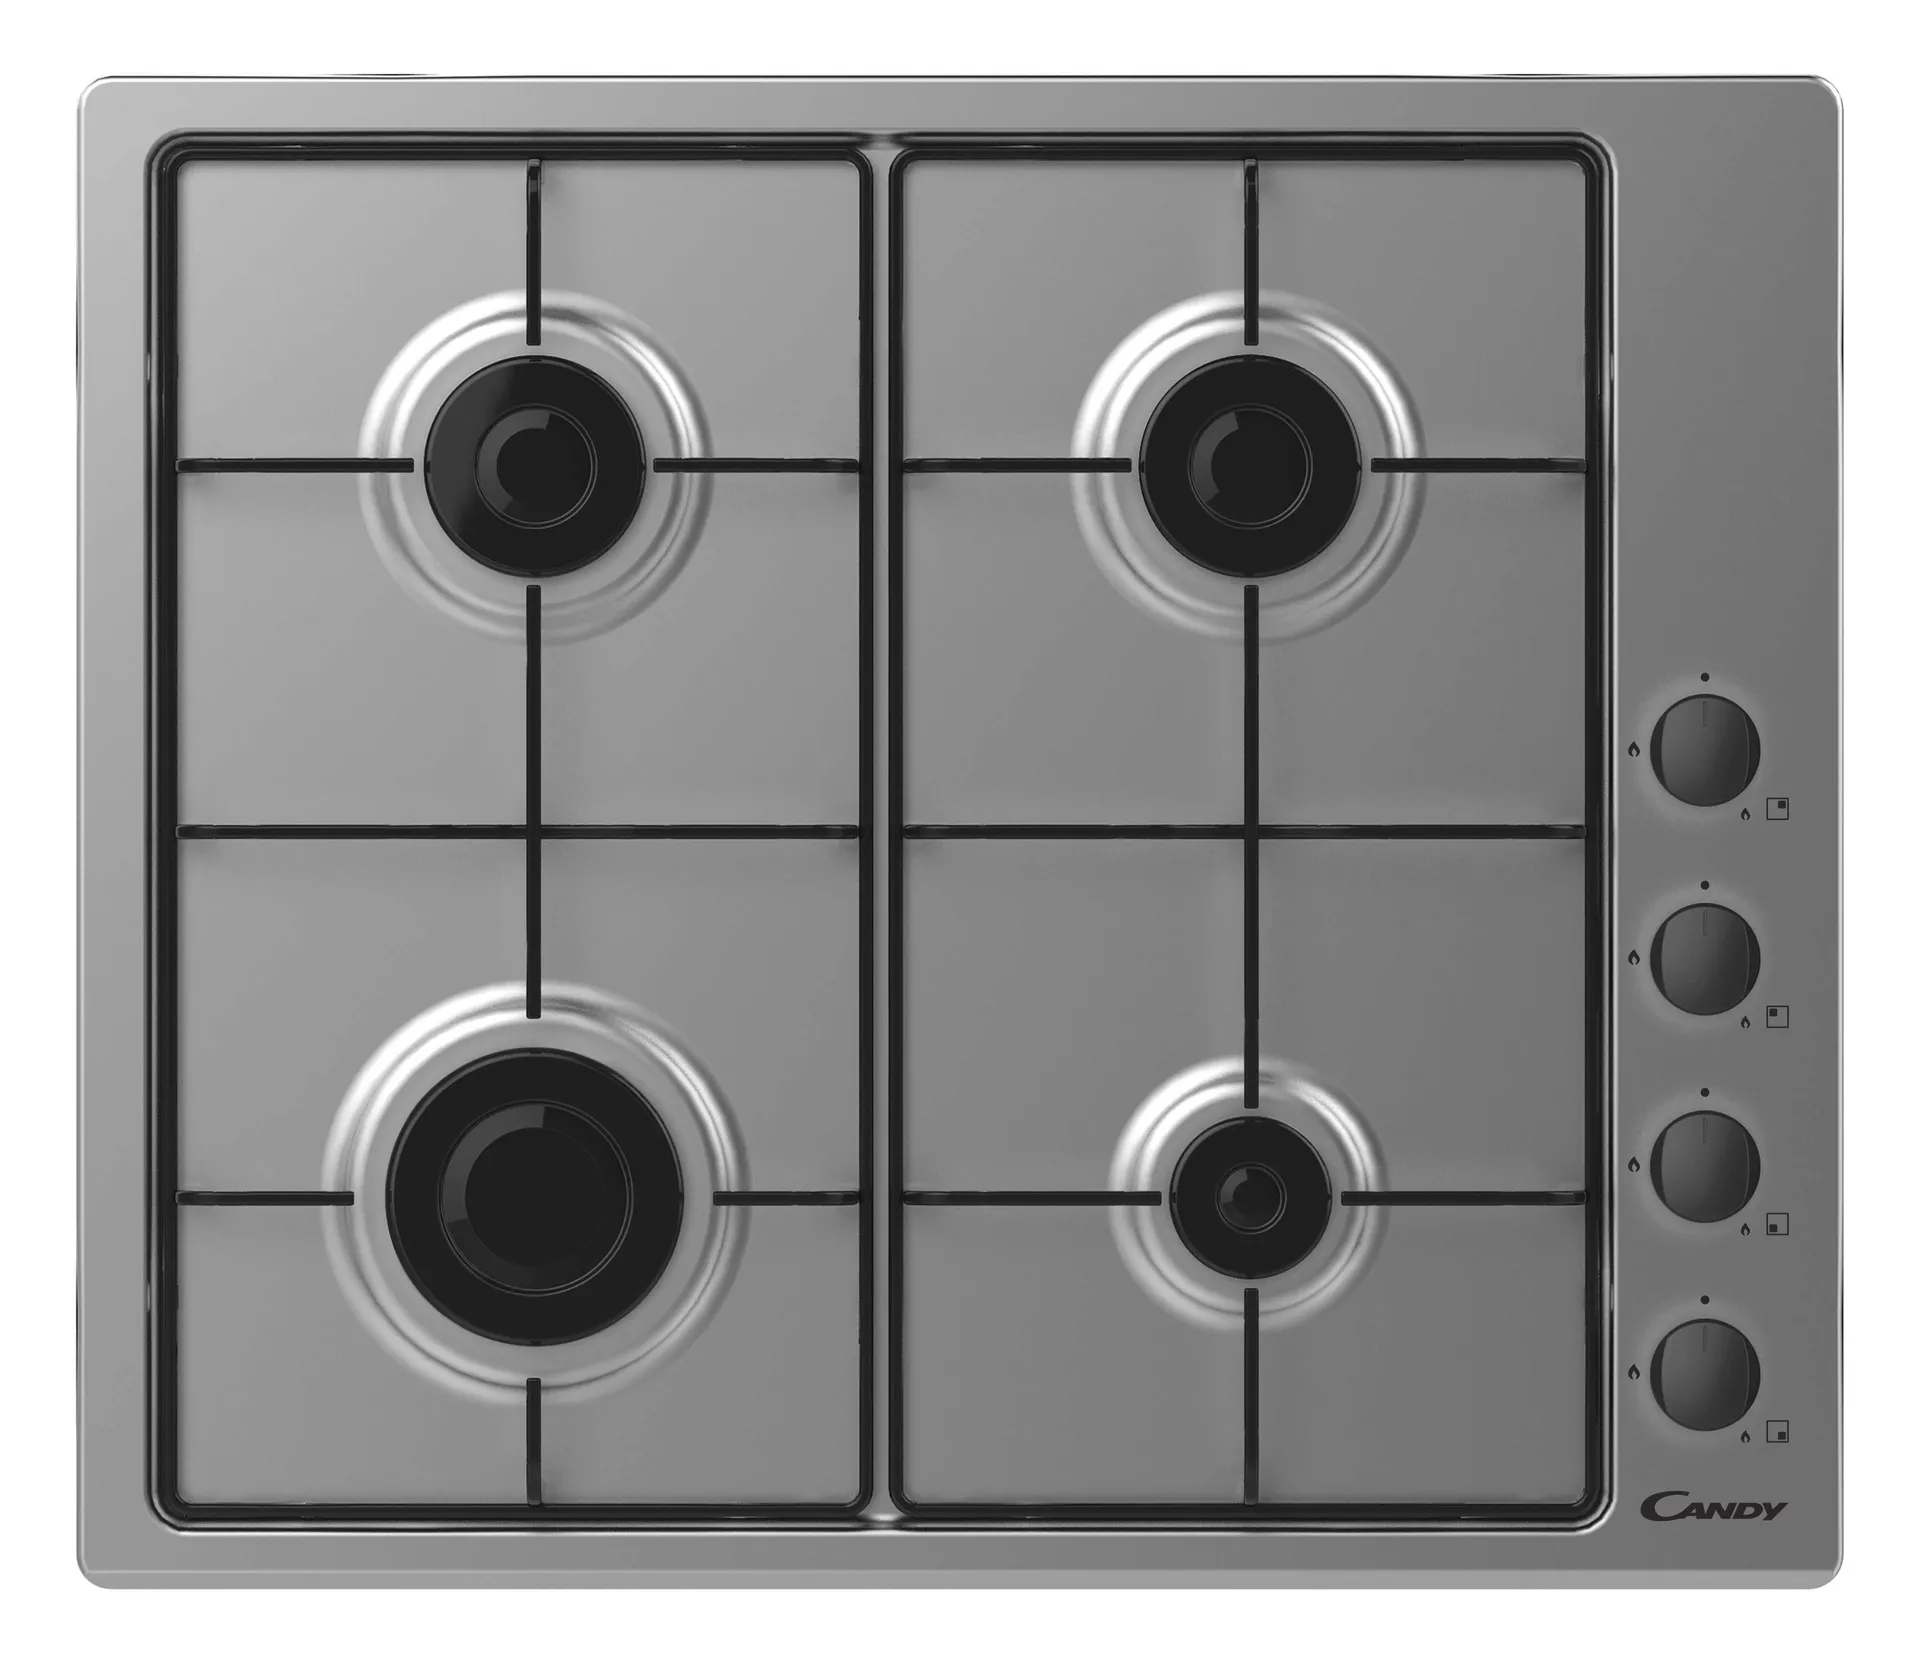 Candy 60cm Gas Hob 4 Burners and Enameled Grids